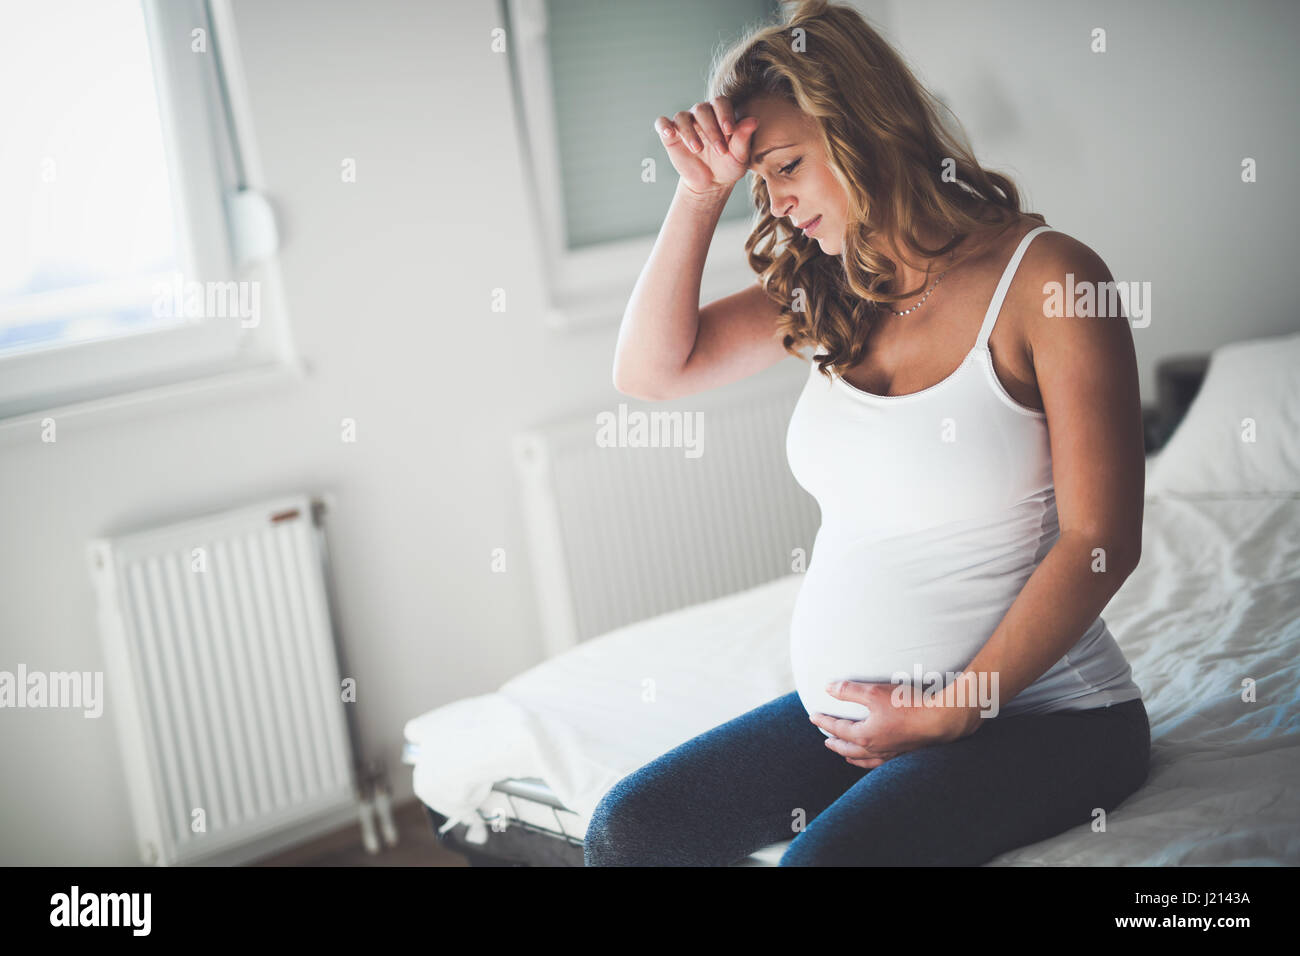 Beautiful expectant pregnant woman suffering from nausea Stock Photo